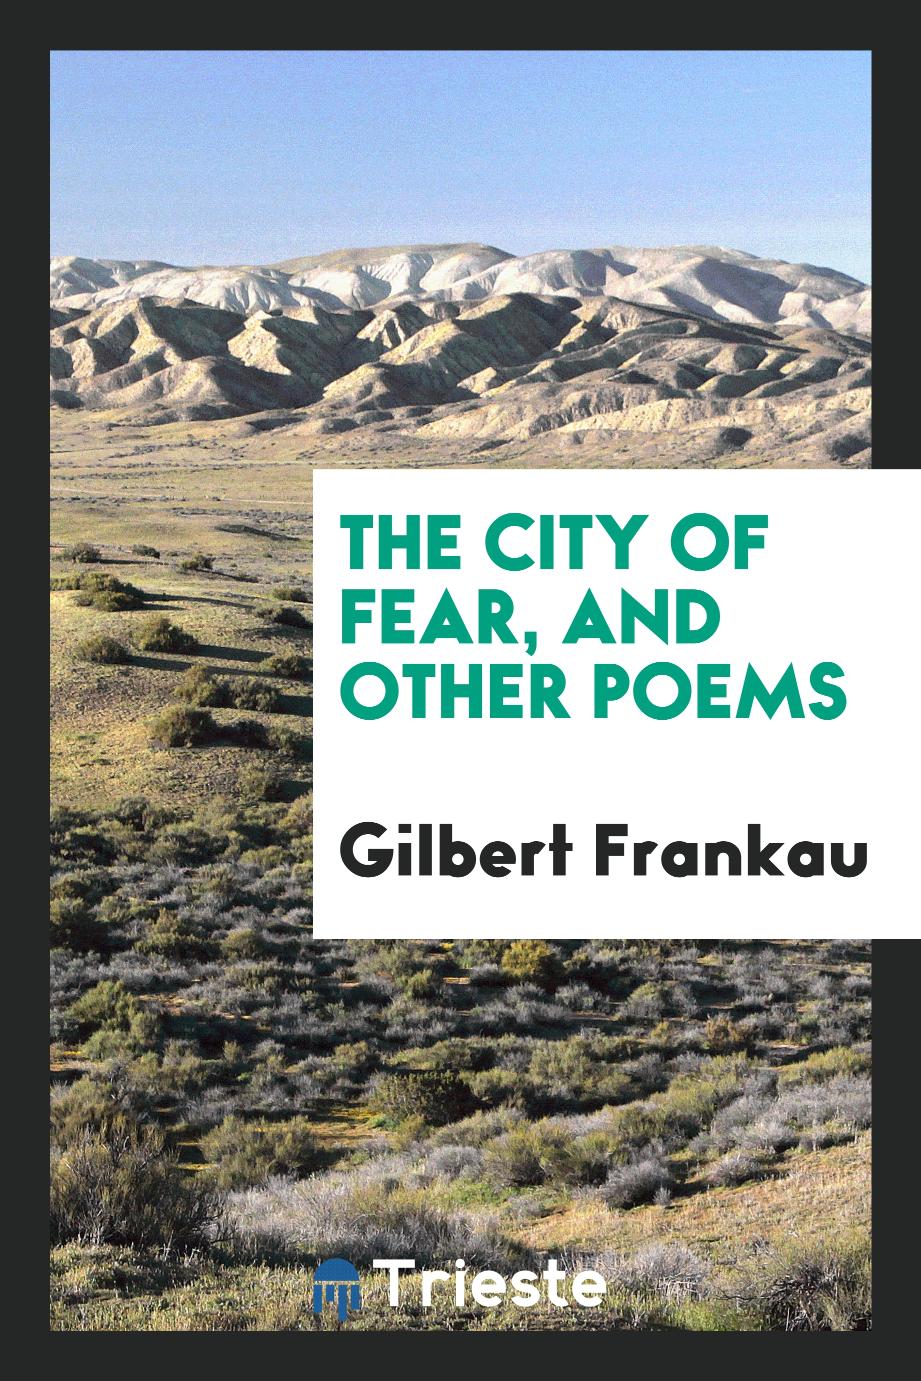 The city of fear, and other poems